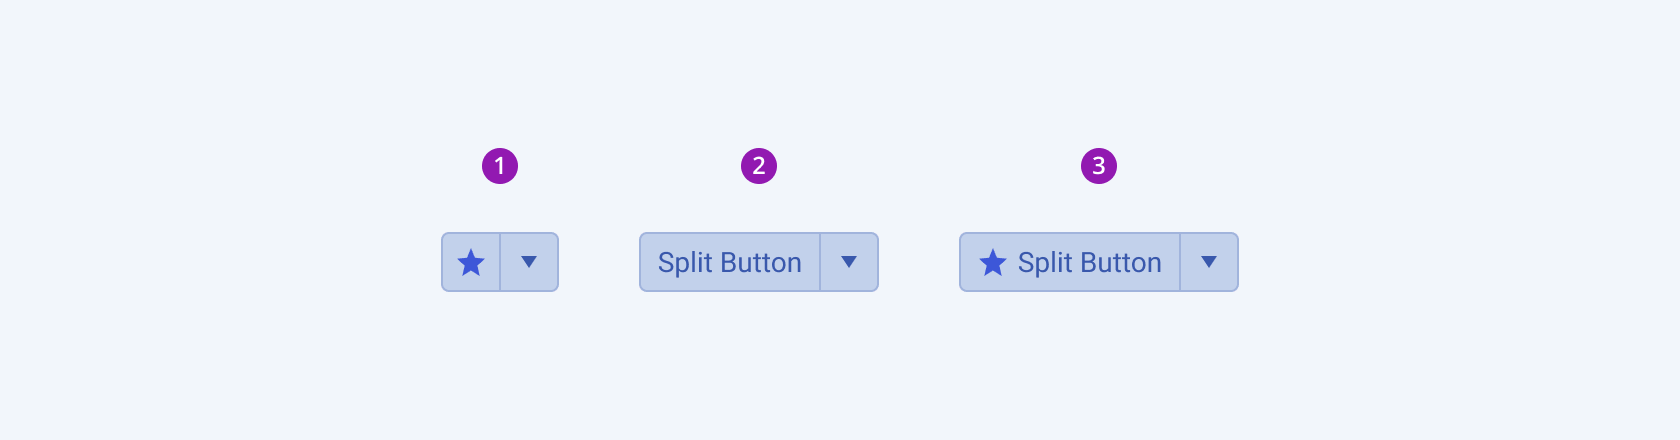 Three variants of the Telerik and Kendo UI SplitButton component showing an icon-only split button, an icon-and-text split button, and a text-only split button.